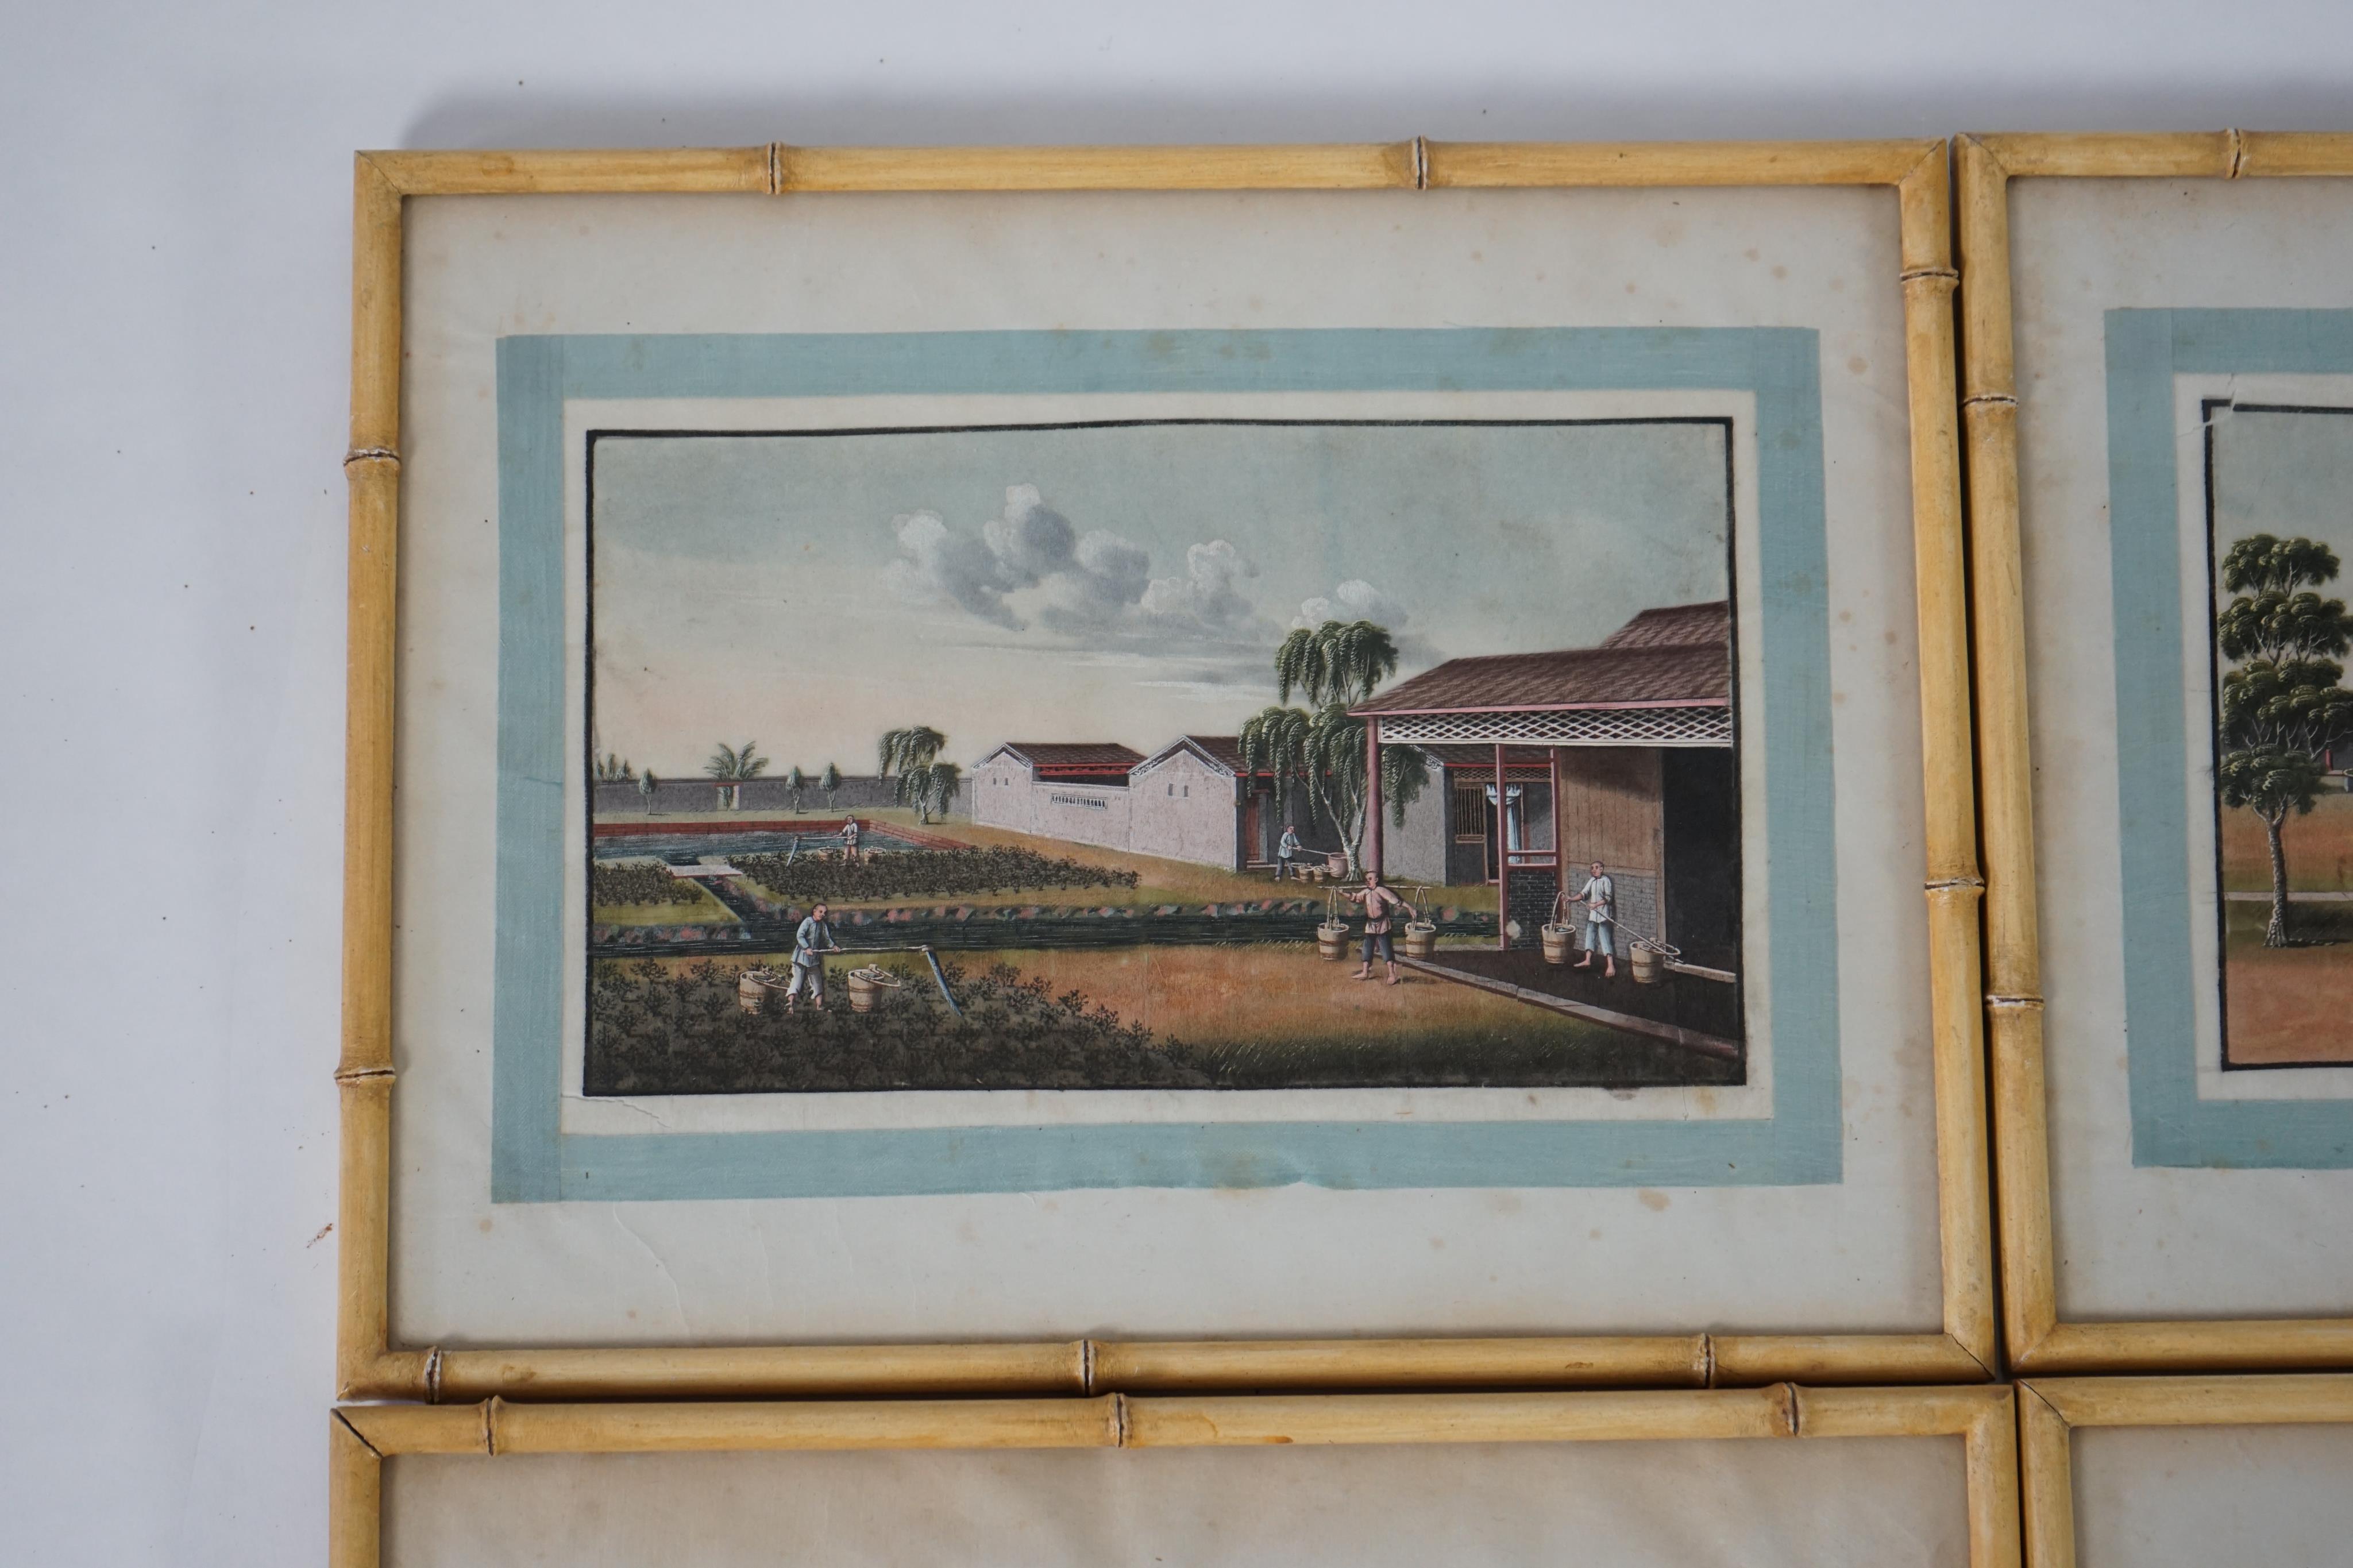 A set of twelve Chinese gouache paintings on pith paper of tea production, circle of Tingqua c.1840